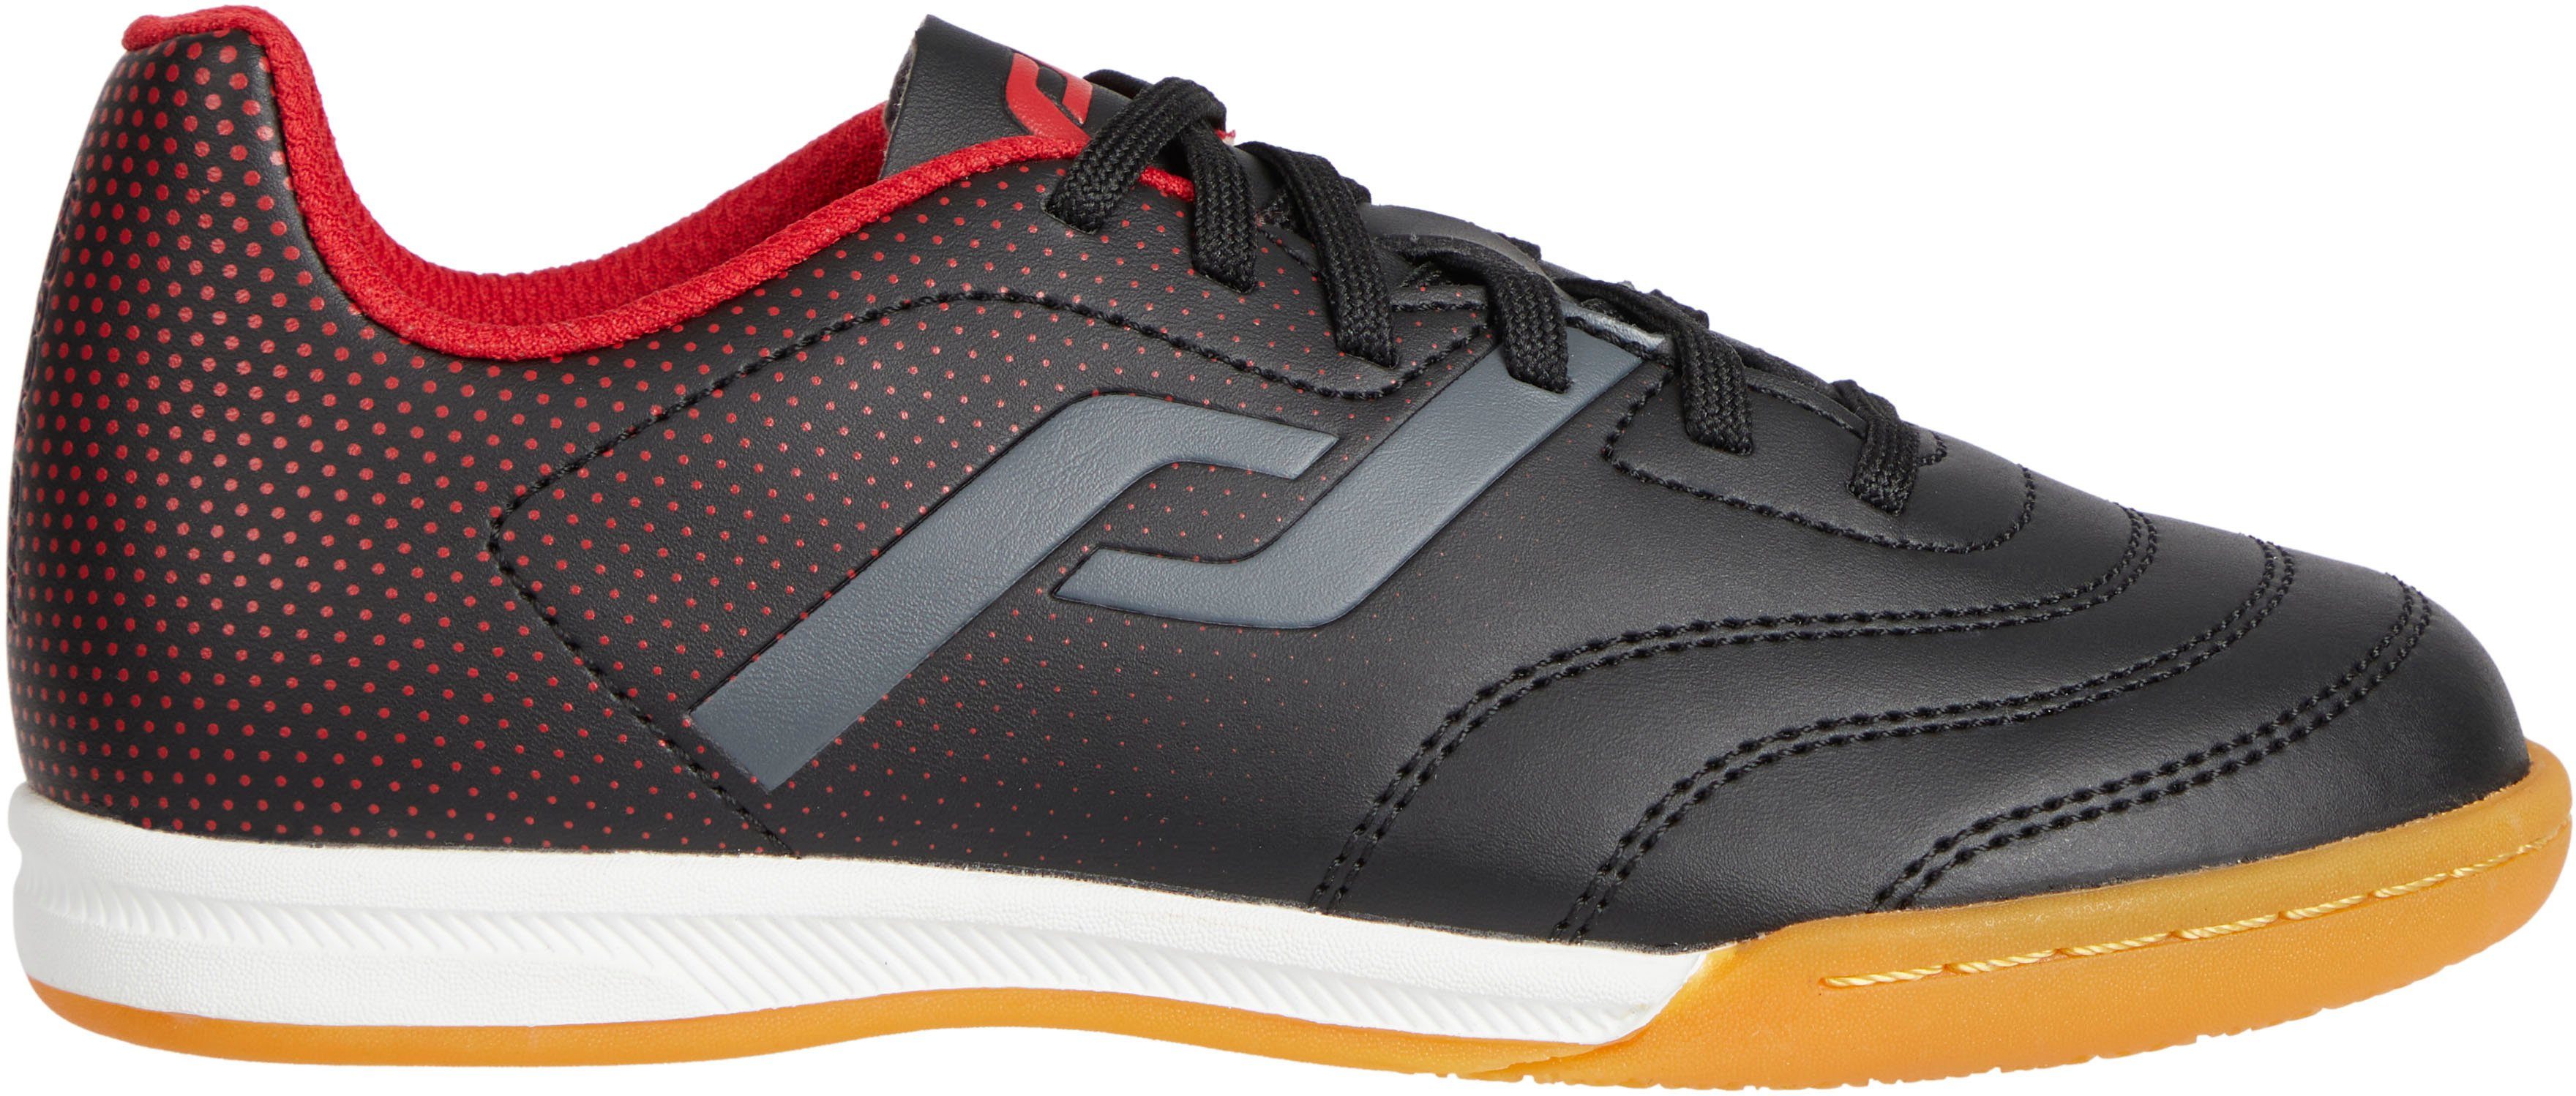 Pro Touch Ind Classic III IN JR Fußballschuh BLACK/RED/ANTHRACITE